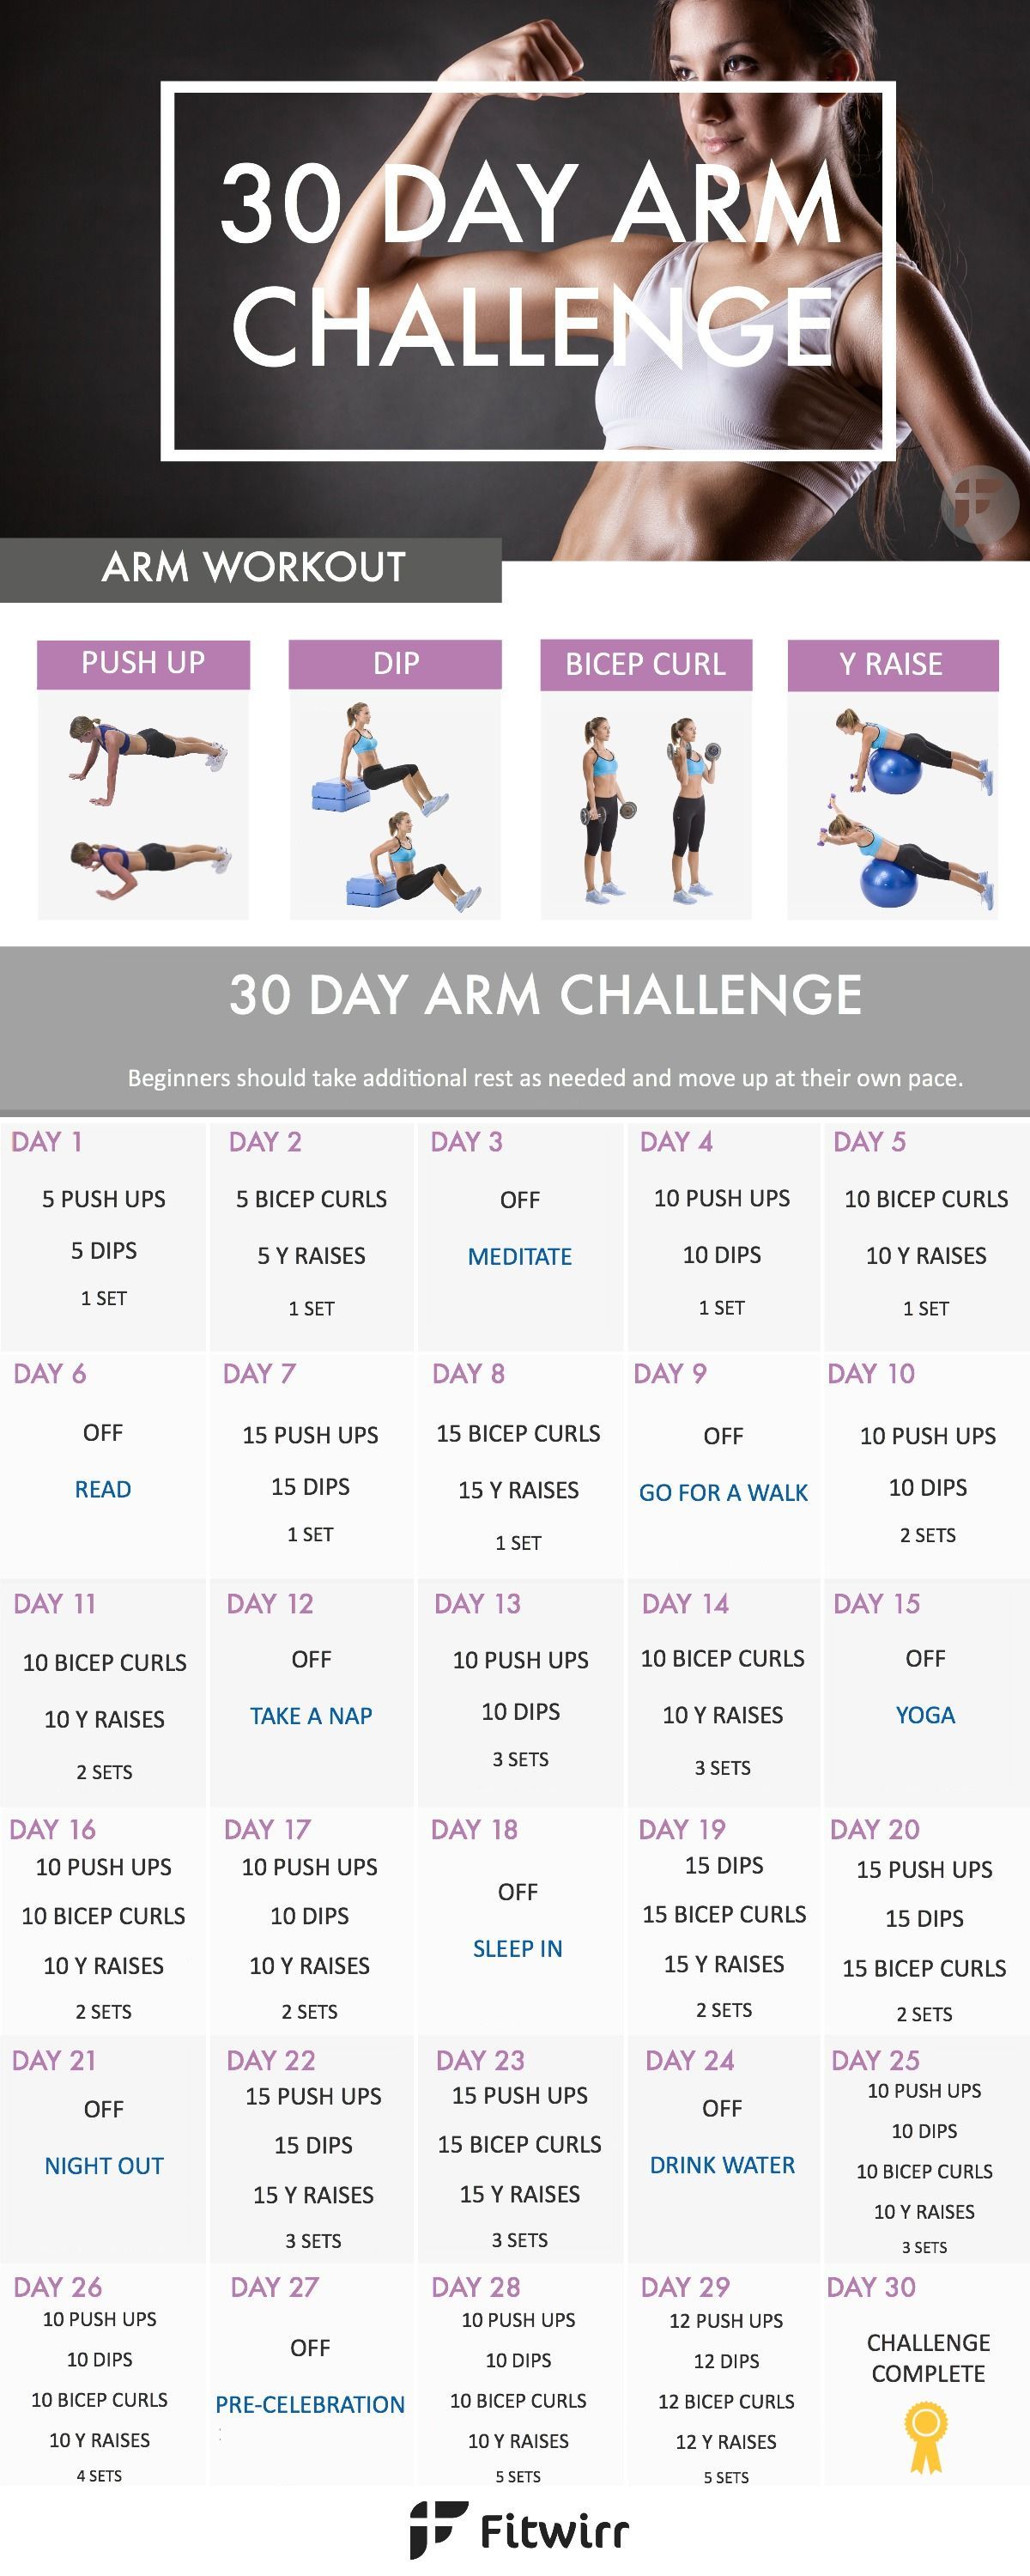 Sculpt and tone your arms in 30 days. Take this 30 Day Arm Challenge. Beginner friendly yet challenging workout to put your arms